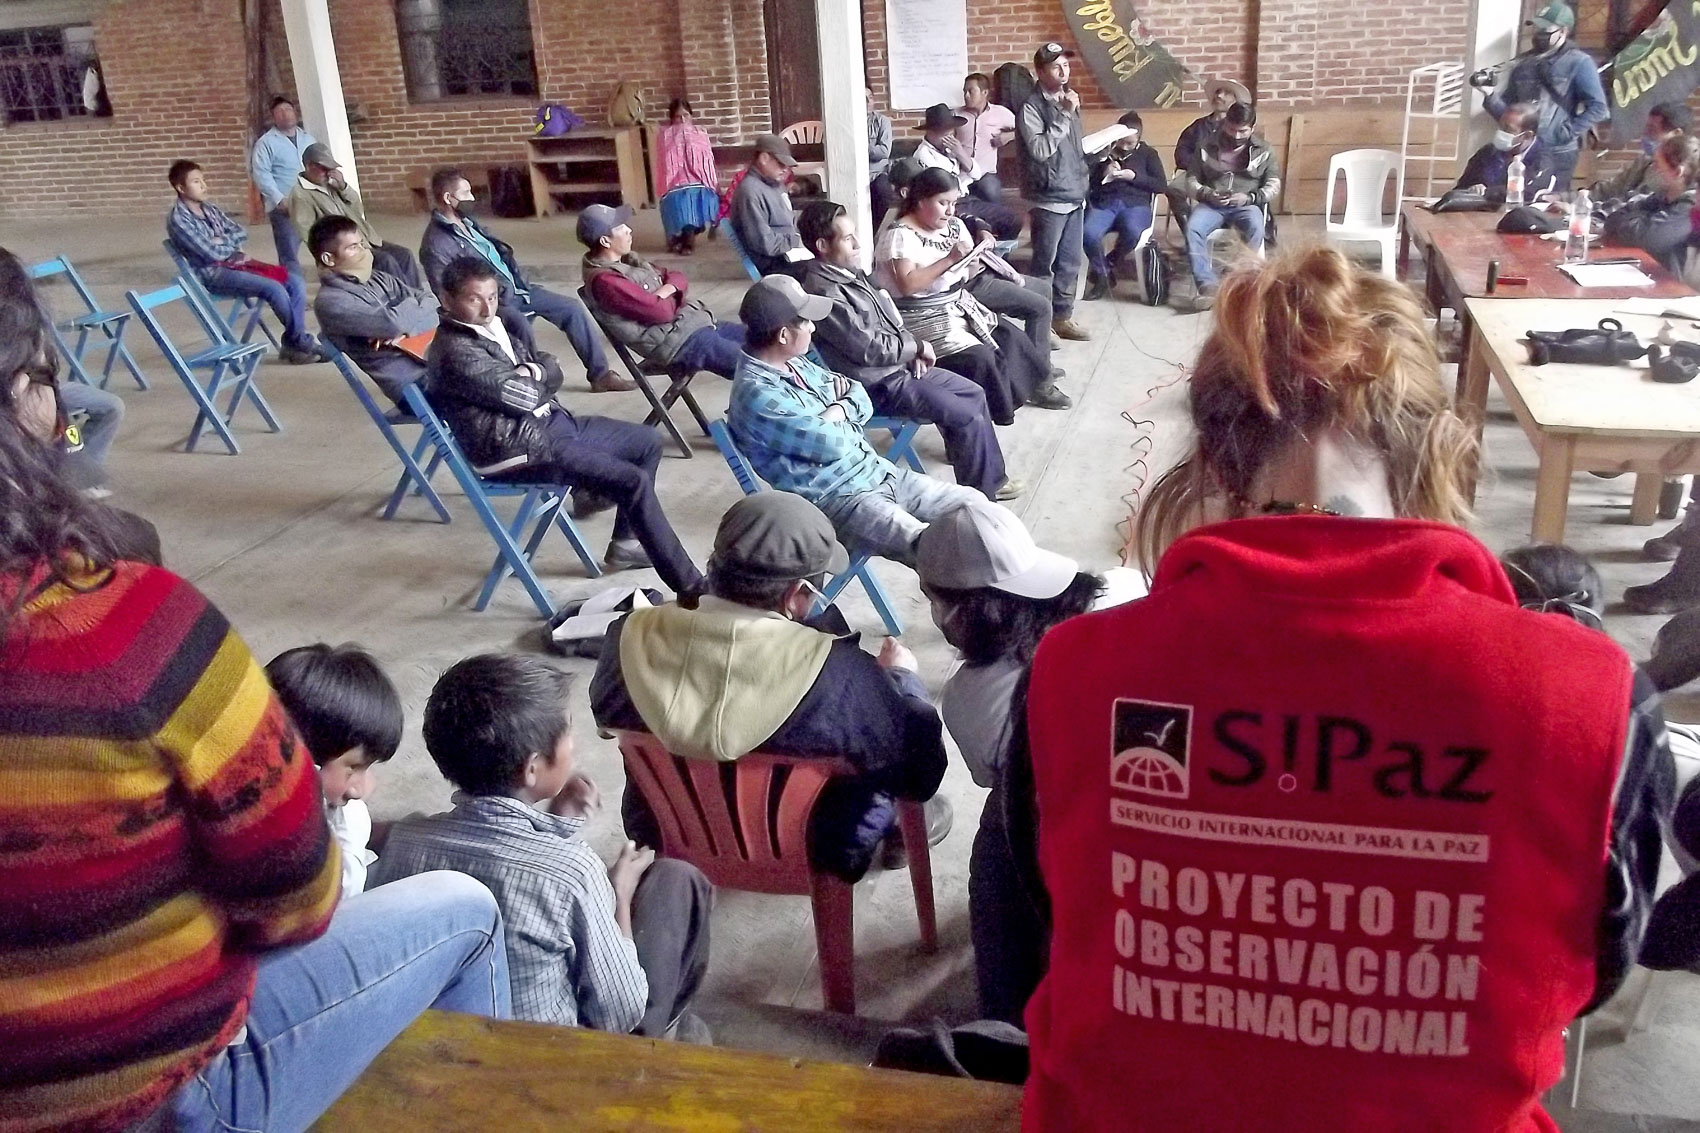 Participation of SIPAZ in Civil Observation Mission © SIPAZ